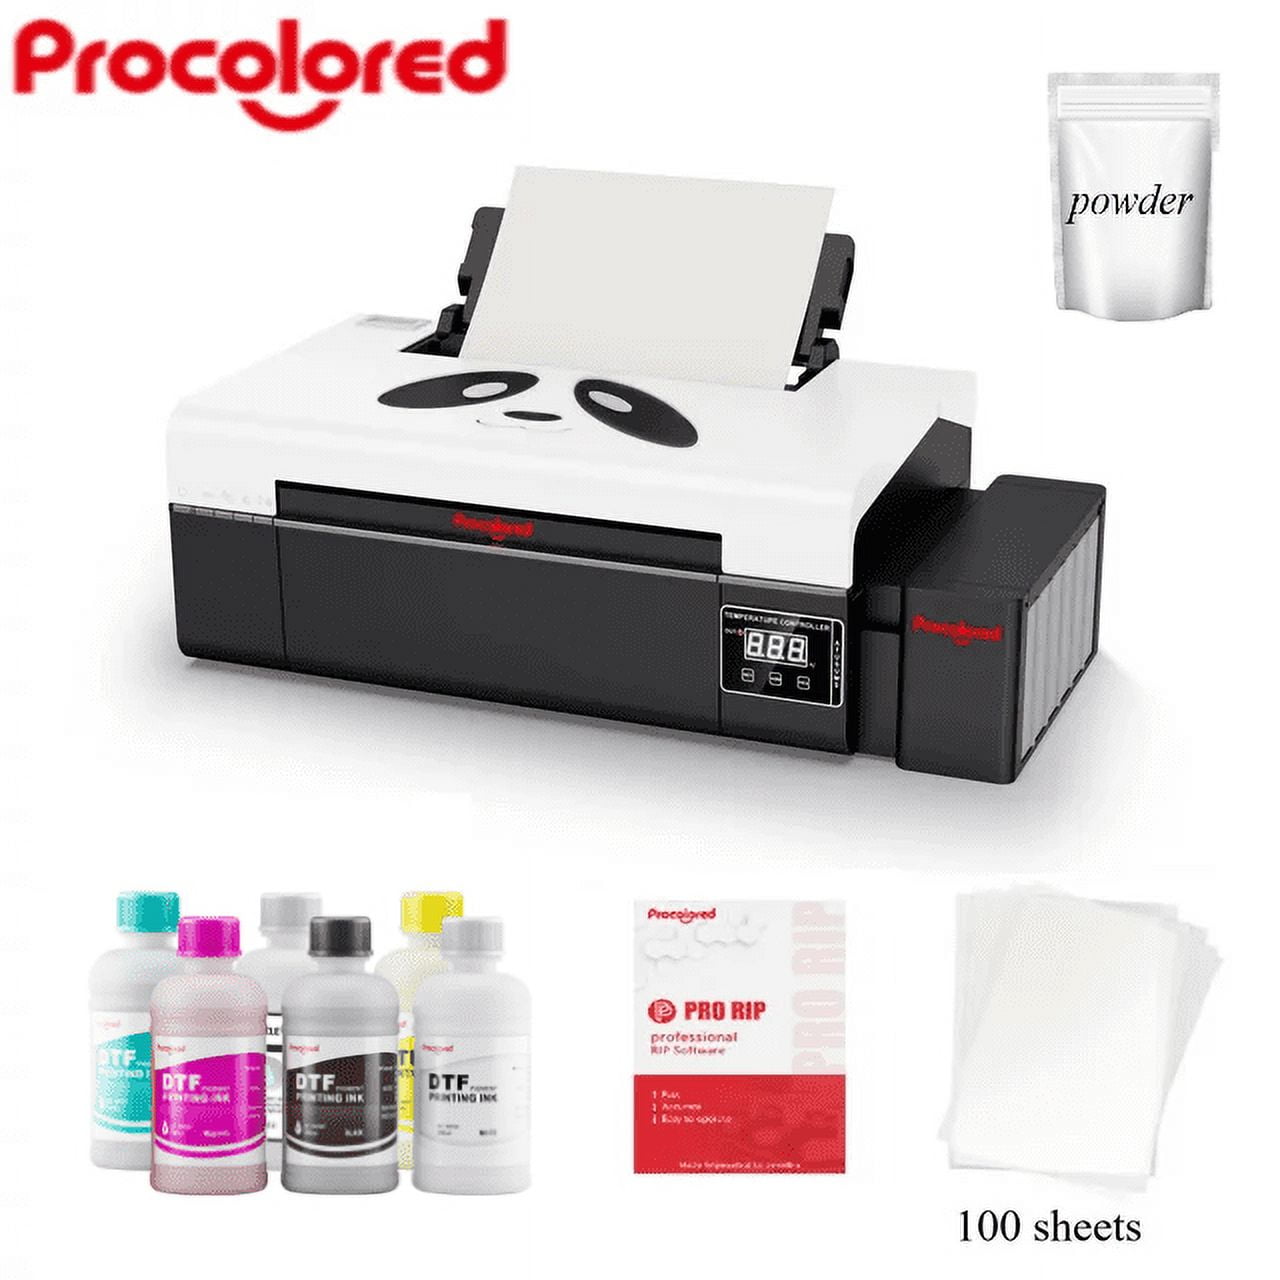 Peripage A4 Paper Printer Direct Thermal Transfer Wirless Printer Mobile 210mm Mini Mobile Photo Printer USB BT Connection with 1 Roll Thermal Paper OS6343-1